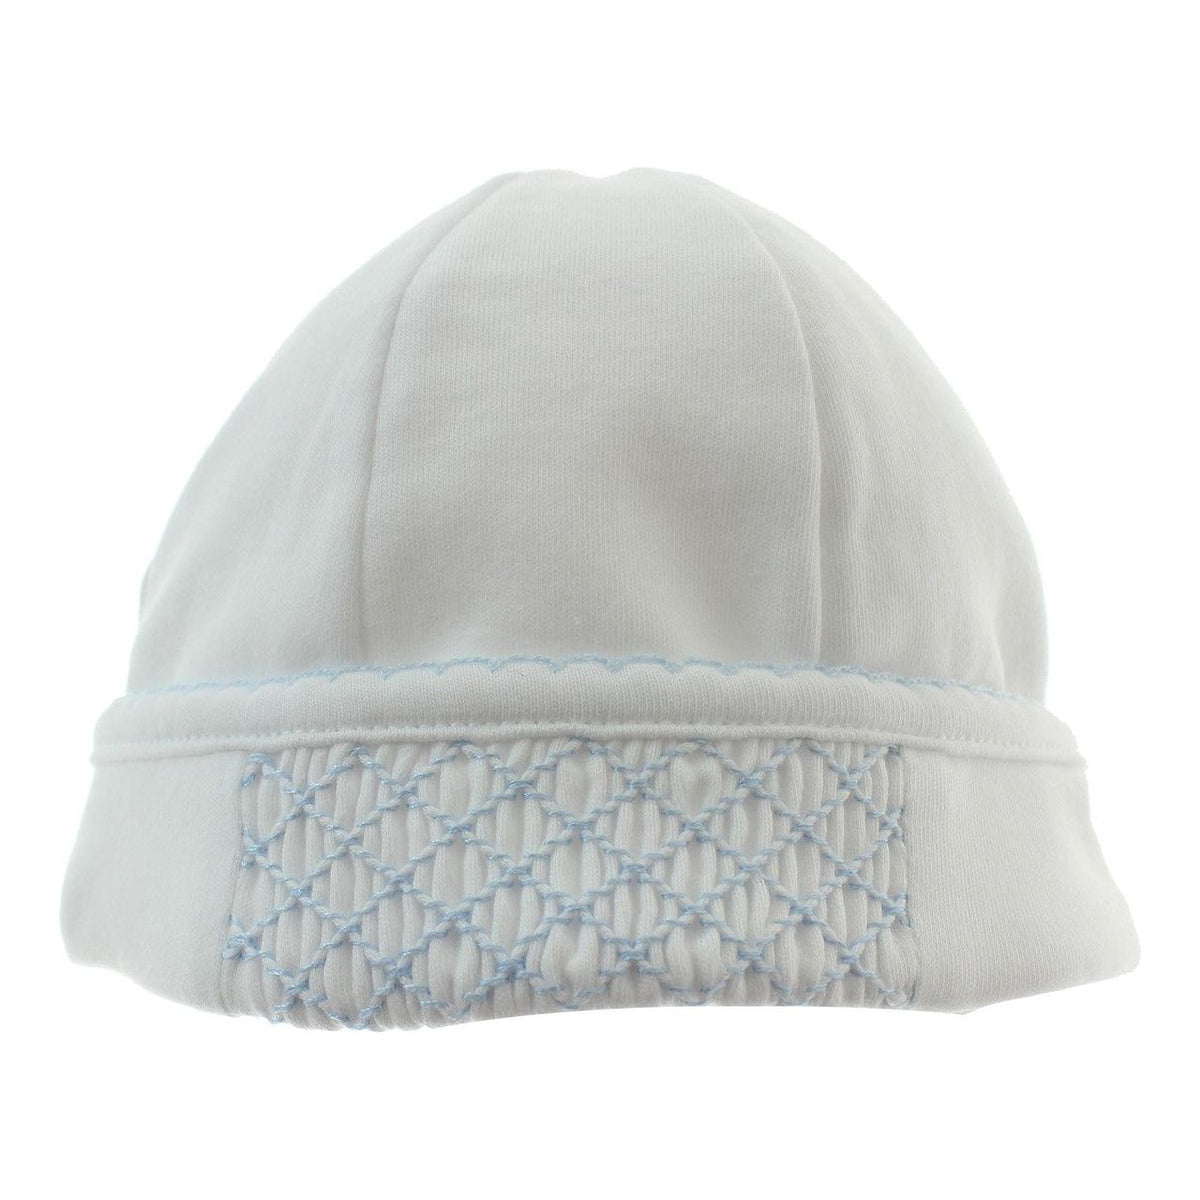 Baby Boys White Take Home Hat with Blue Smocking